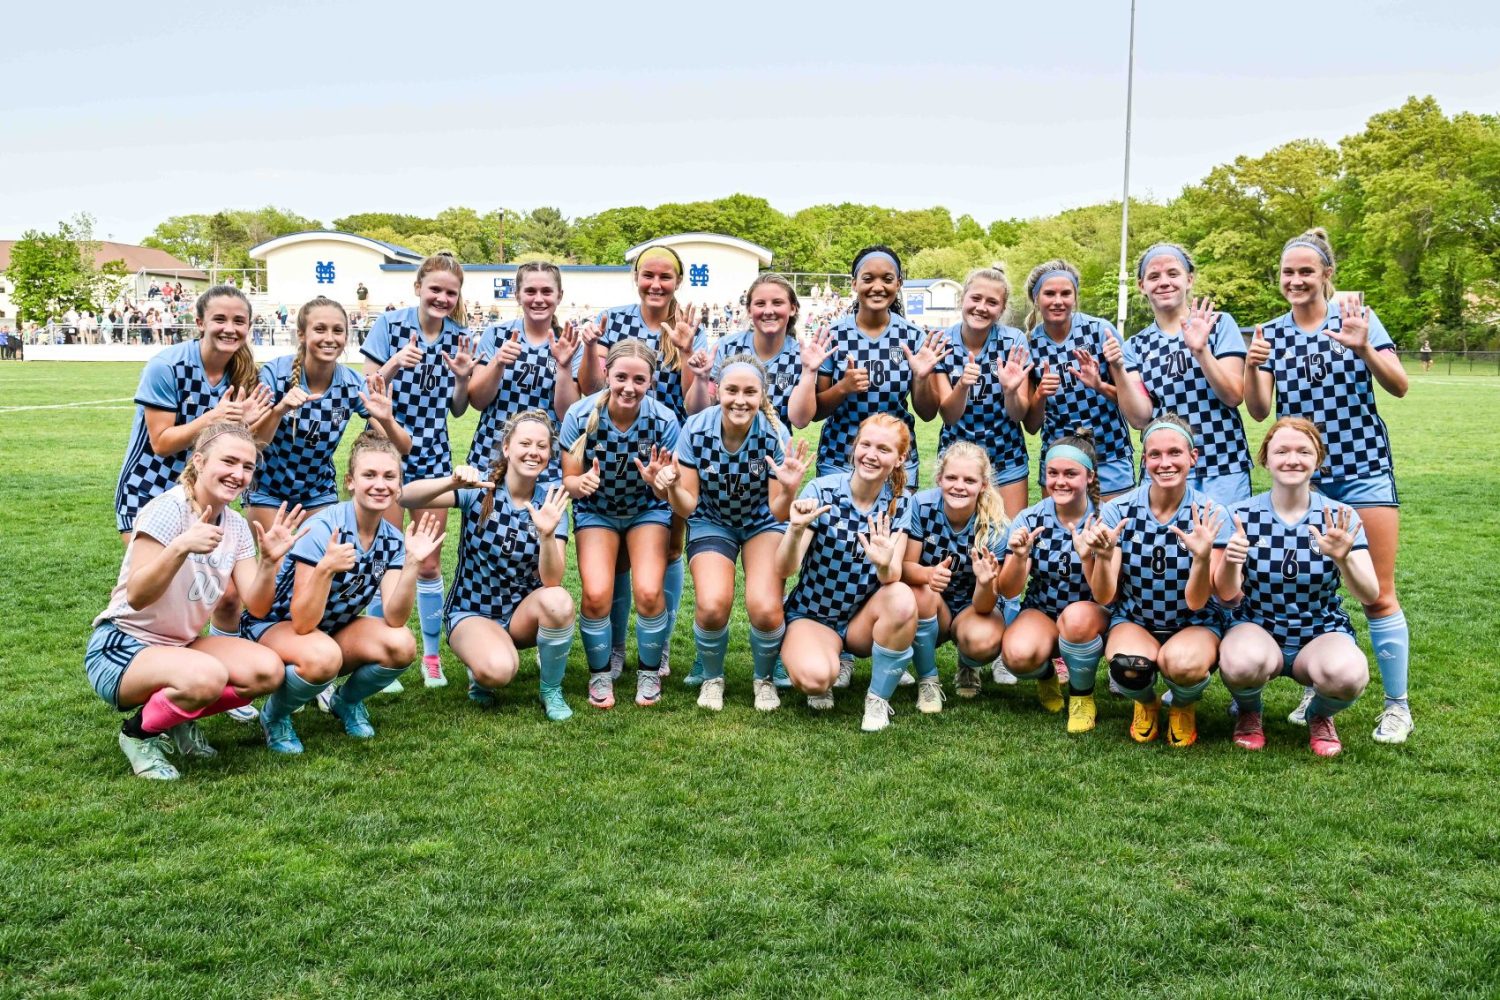 Katie Phillips scores the lone goal as Mona Shores wins OK-Green soccer title